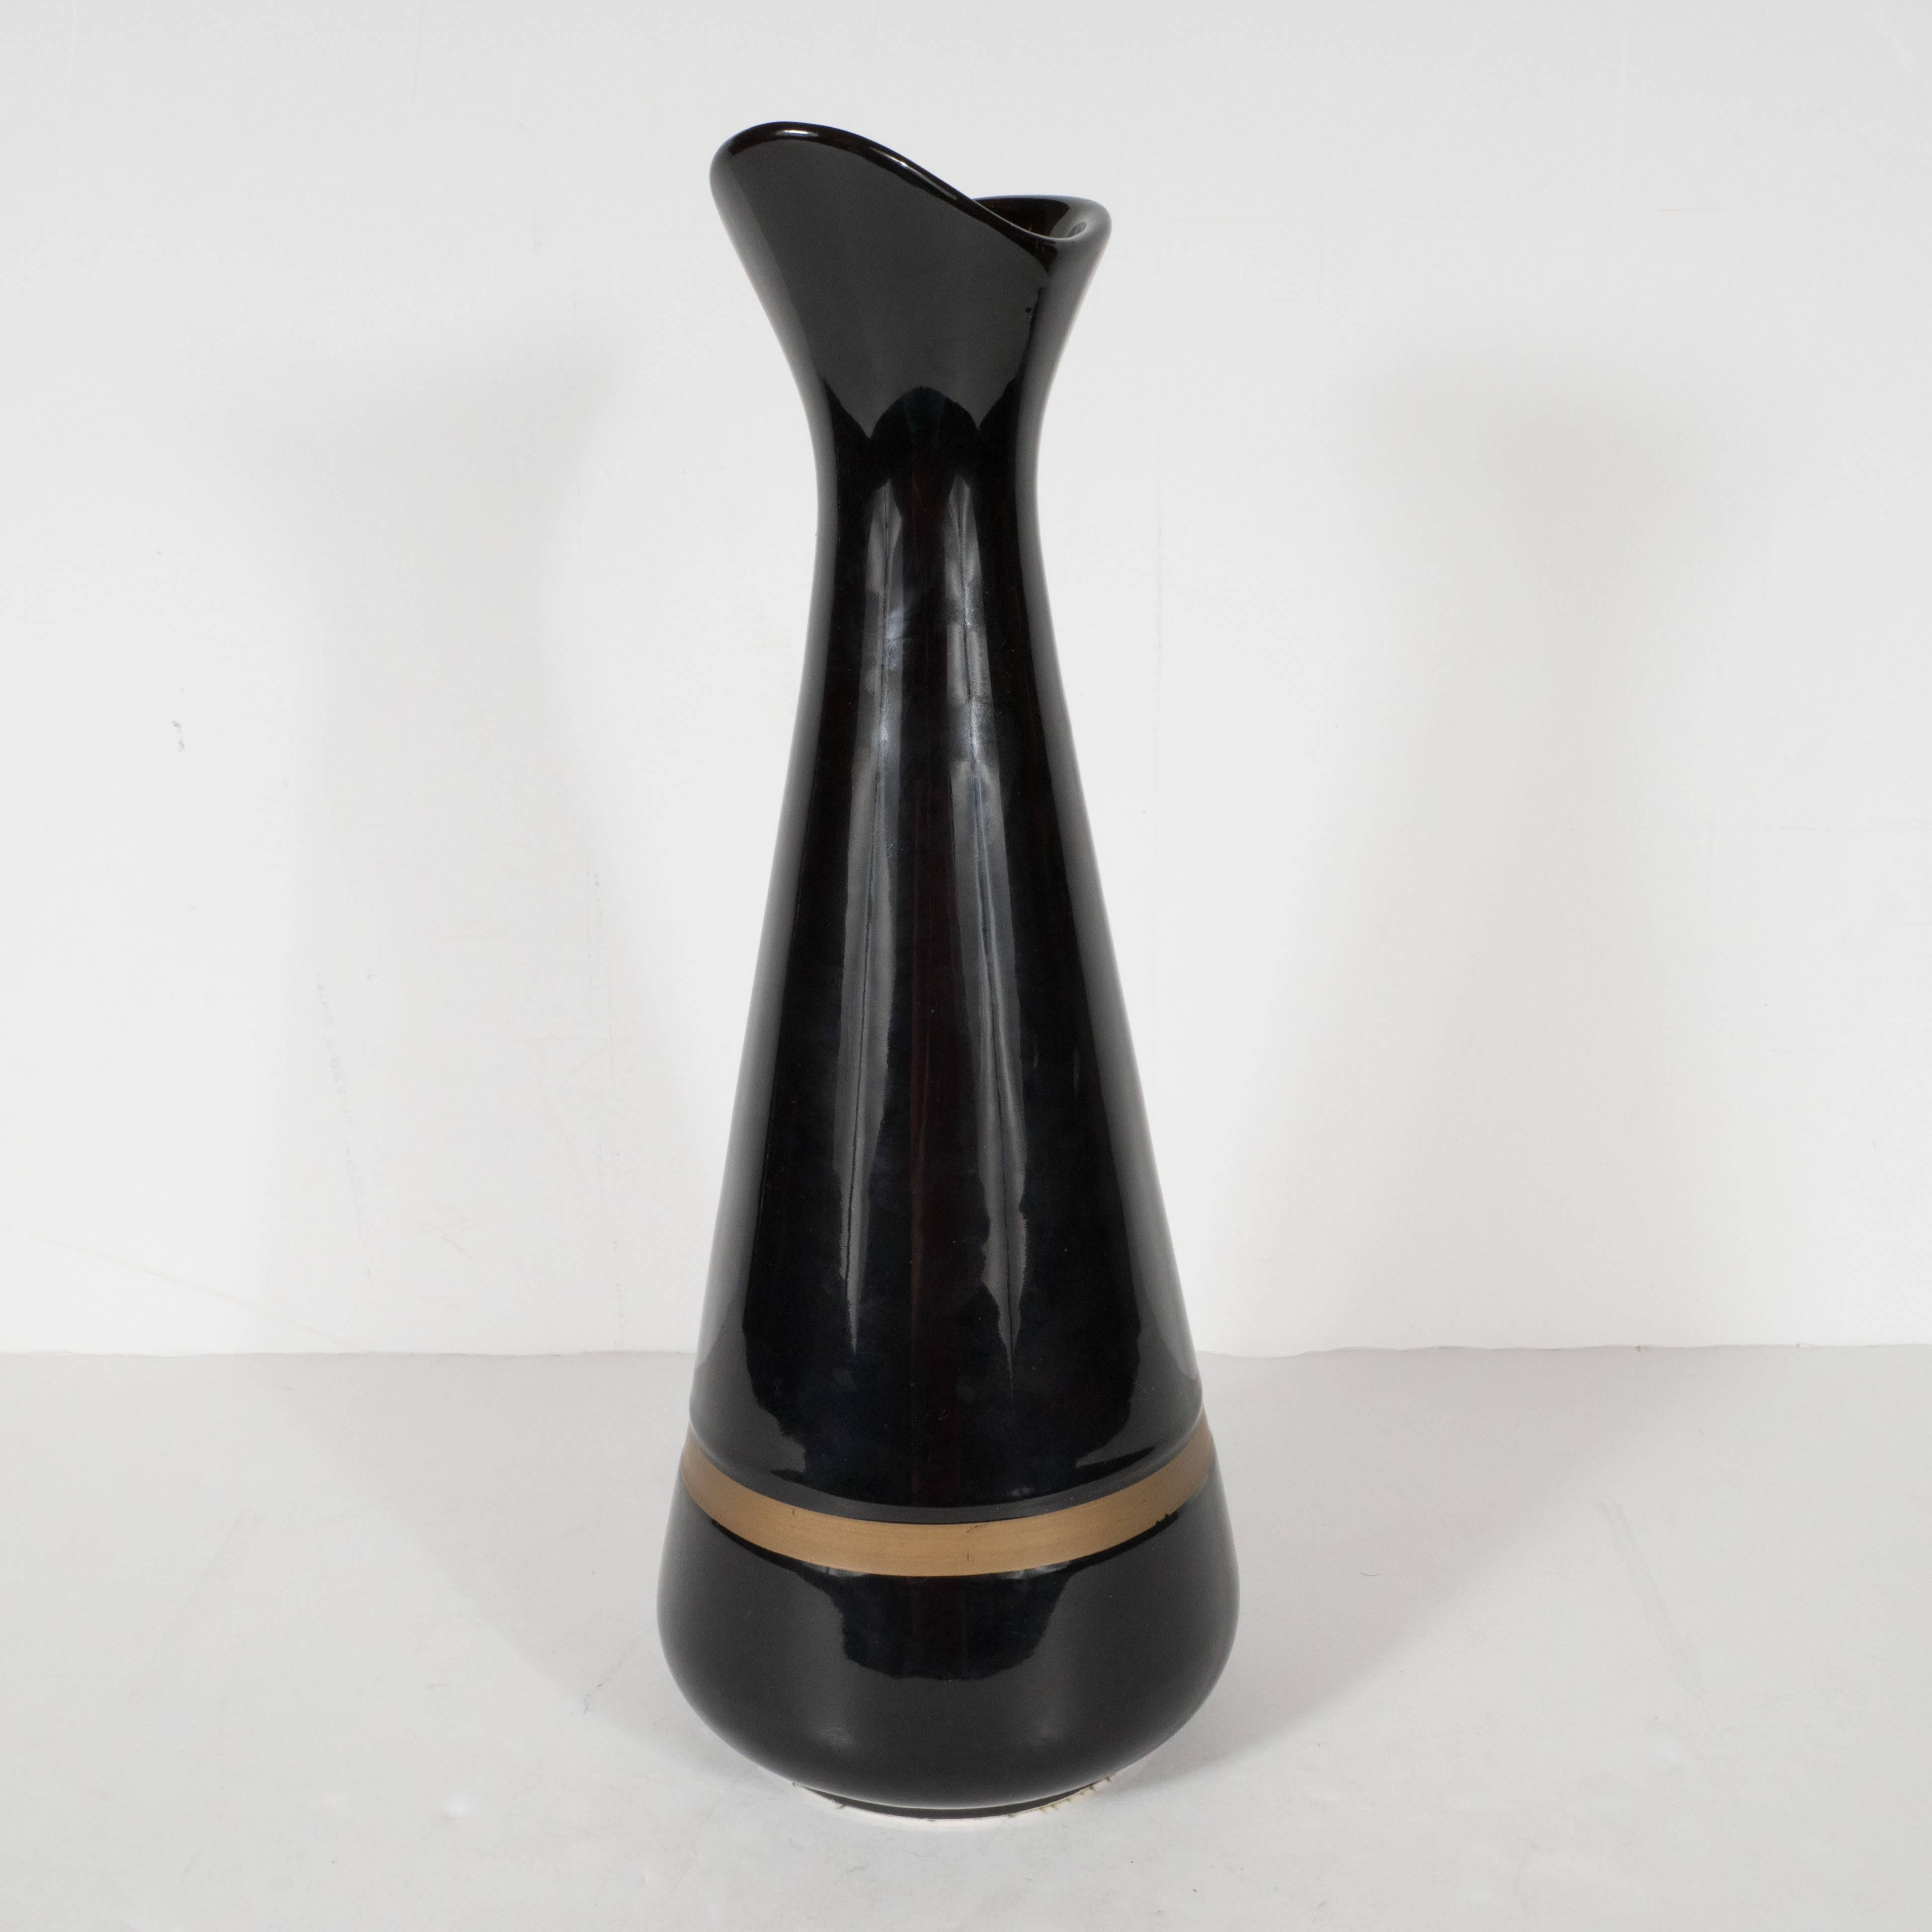 This sophisticated black vase was produced by Hull Pottery- the renowned American producer based in Crooksville, Ohio, circa 1950. The simple hourglass form reads as quintessentially Mid-Century Modernist. The austere palate, consisting of radiant